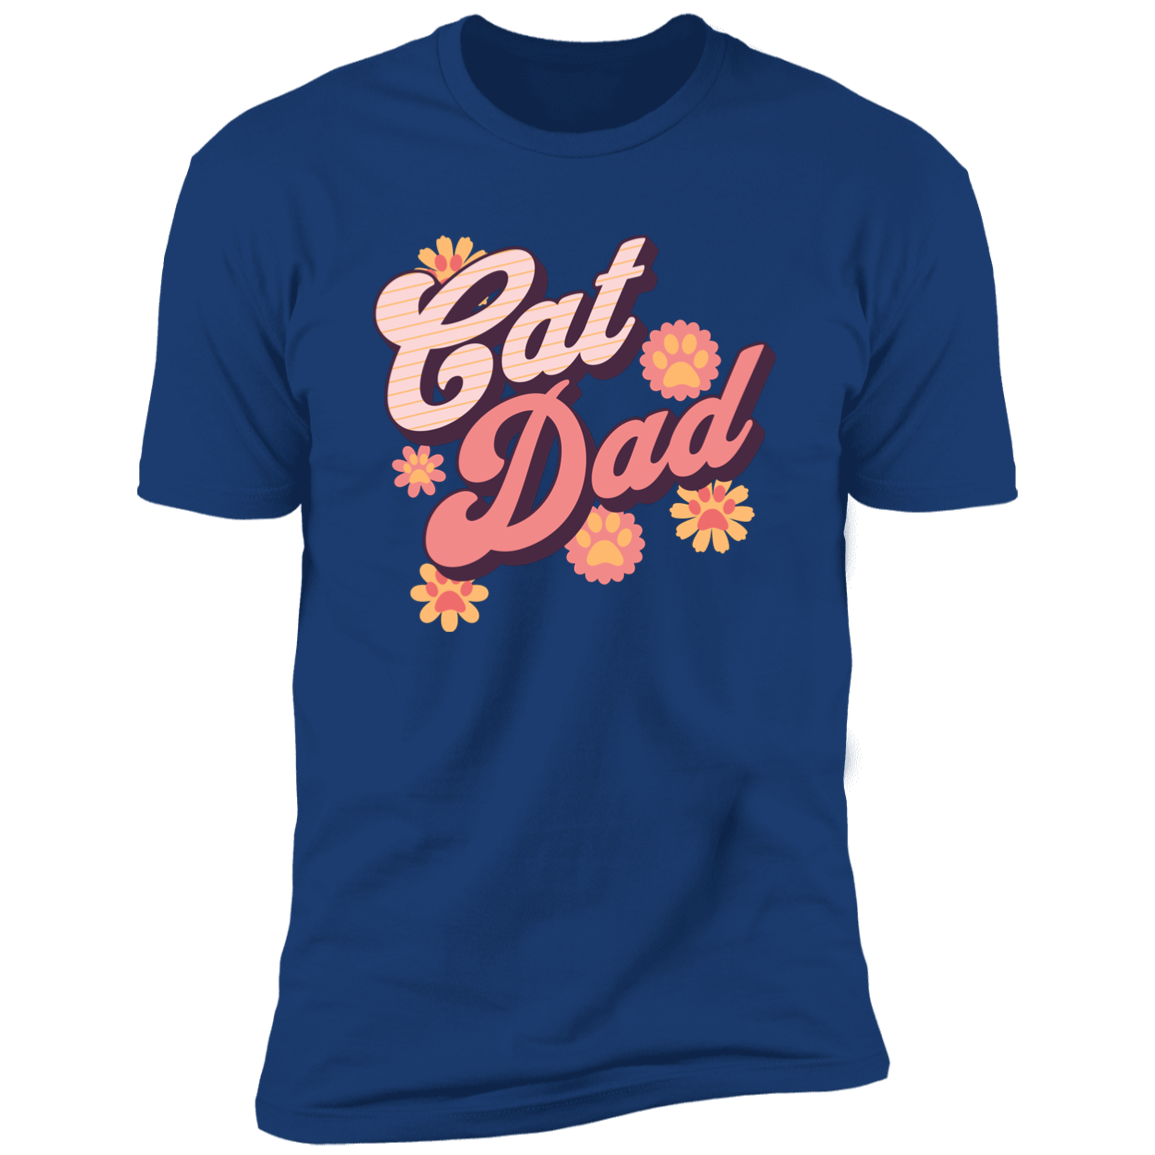 Cat Dad Retro T-shirt, Cat Dad Shirt for humans, in royal blue